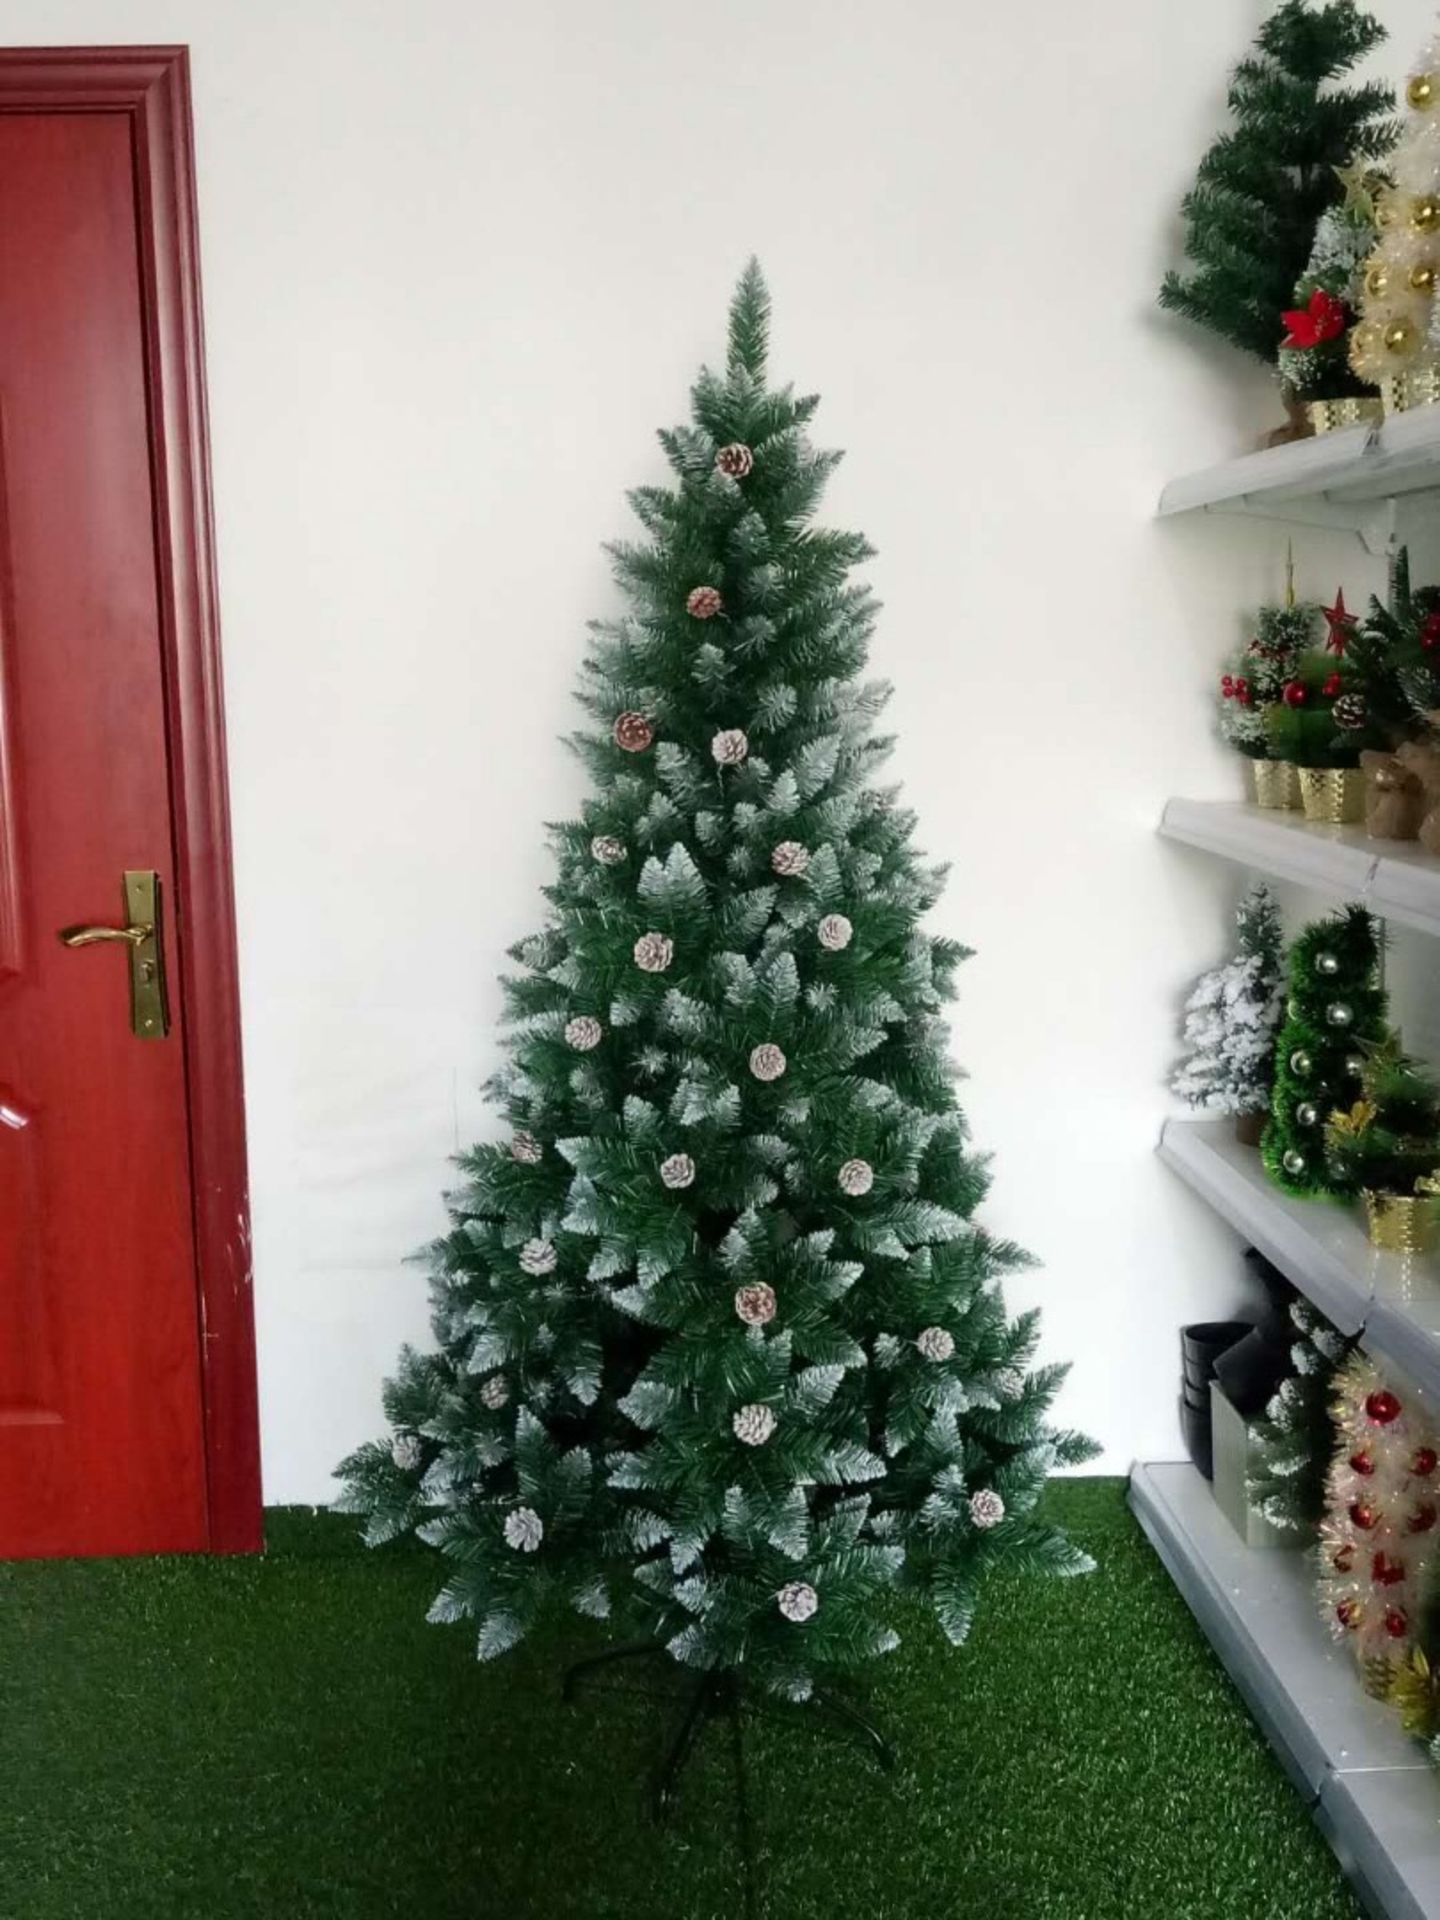 + VAT Brand New "Noel" Luxury 6ft Snowy Spruce Christmas Tree With Pine Cone Decoration And Frosted